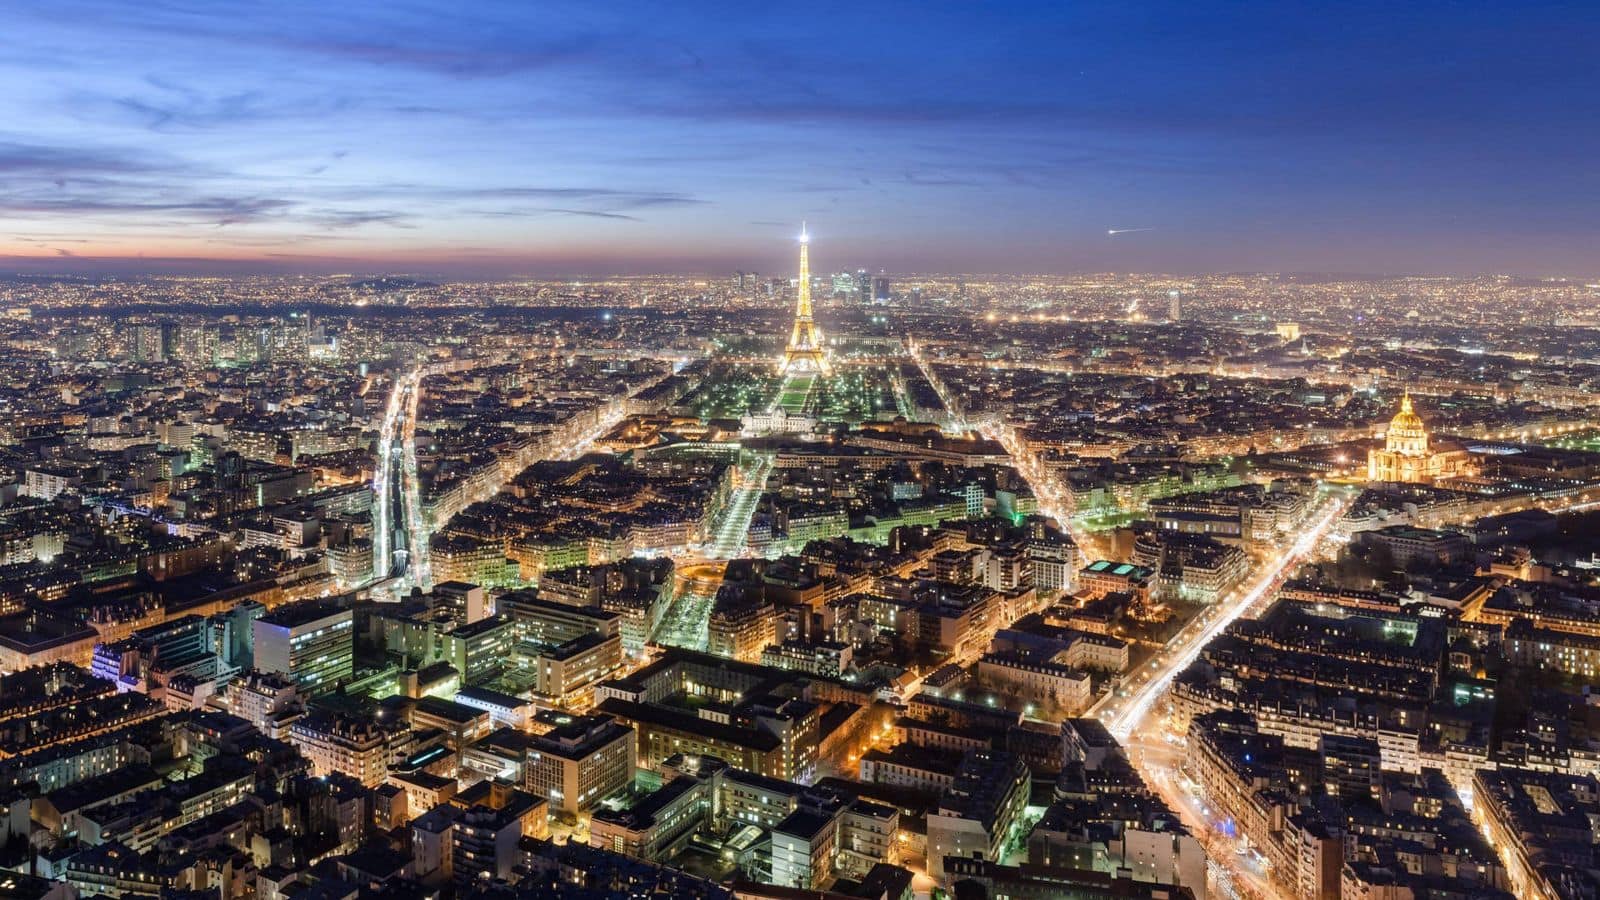 Explore the nightlife of Paris with these travel recommendations